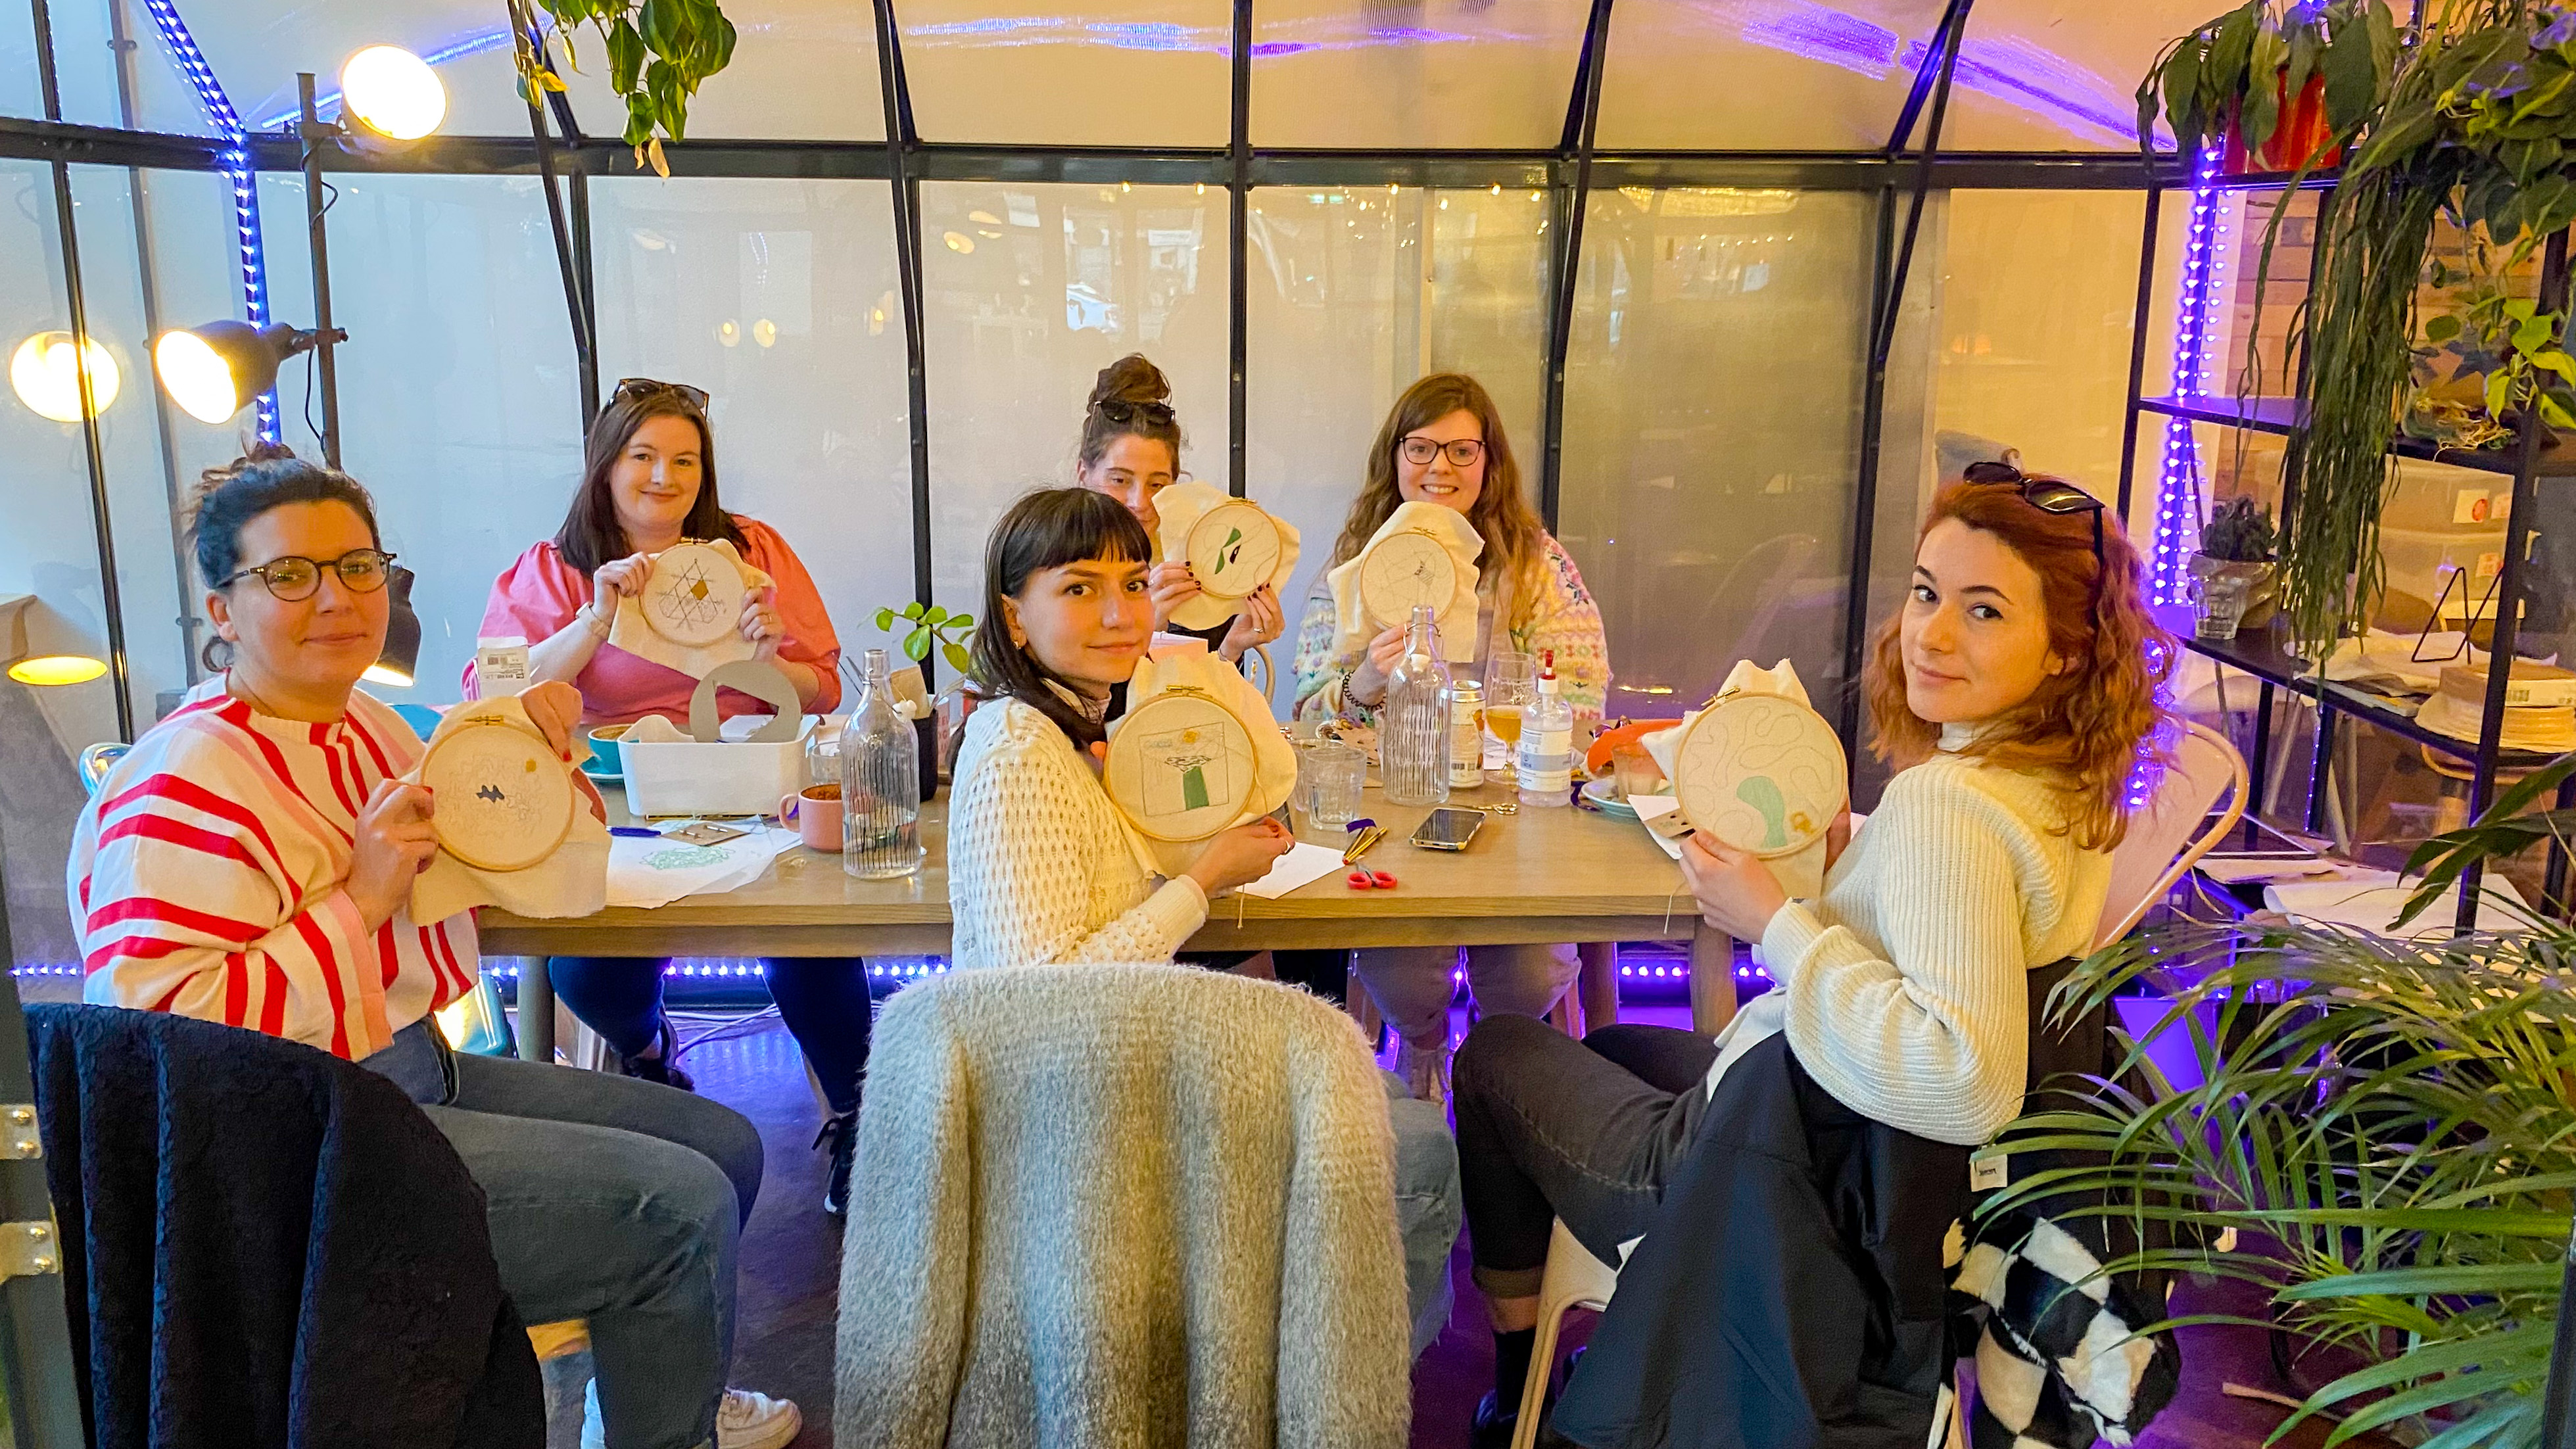 A photo of a small group of people, proudly holding their embroidery hoops to the camera. Taken at a Mindful Embroidery Workshop in Manchester ran by Stephie from Hoop & Fred.